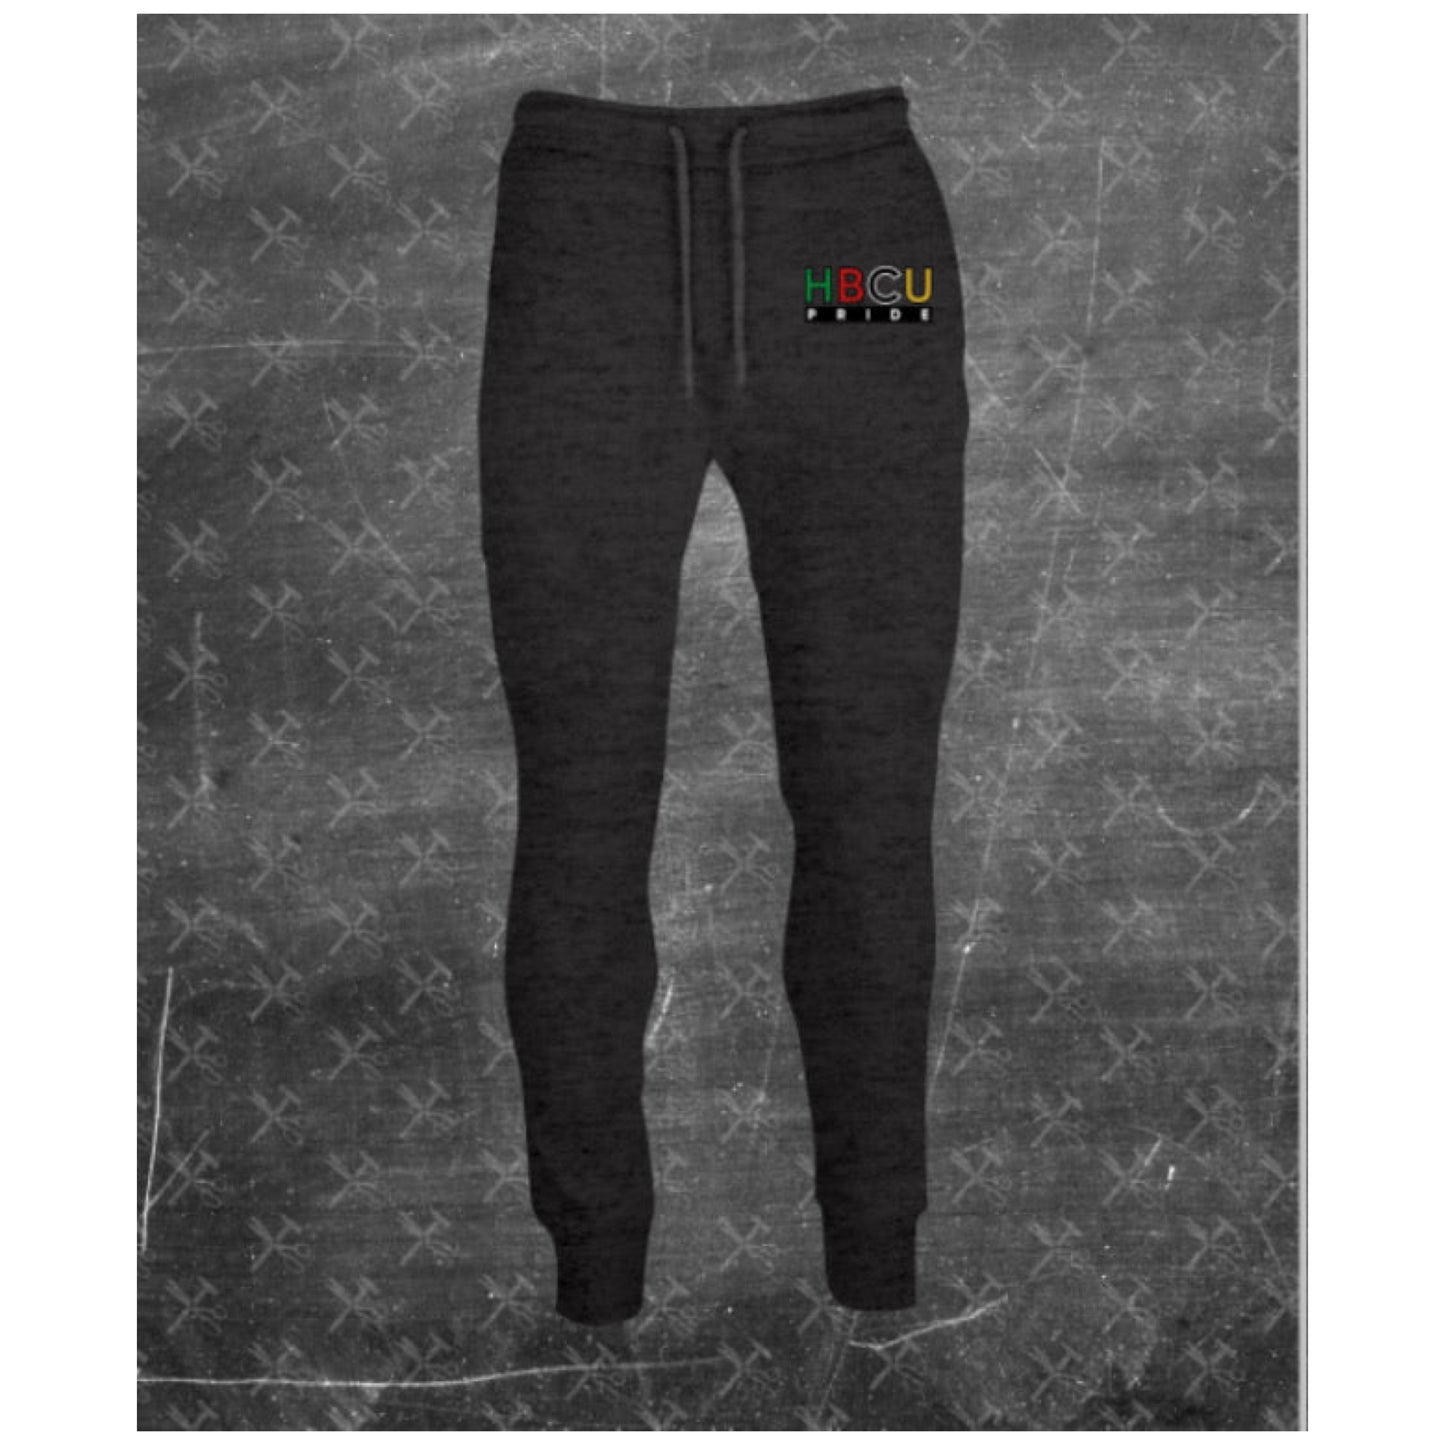 HBCU Pride Joggers in Charcoal Gray “Da Cookout” #joggers